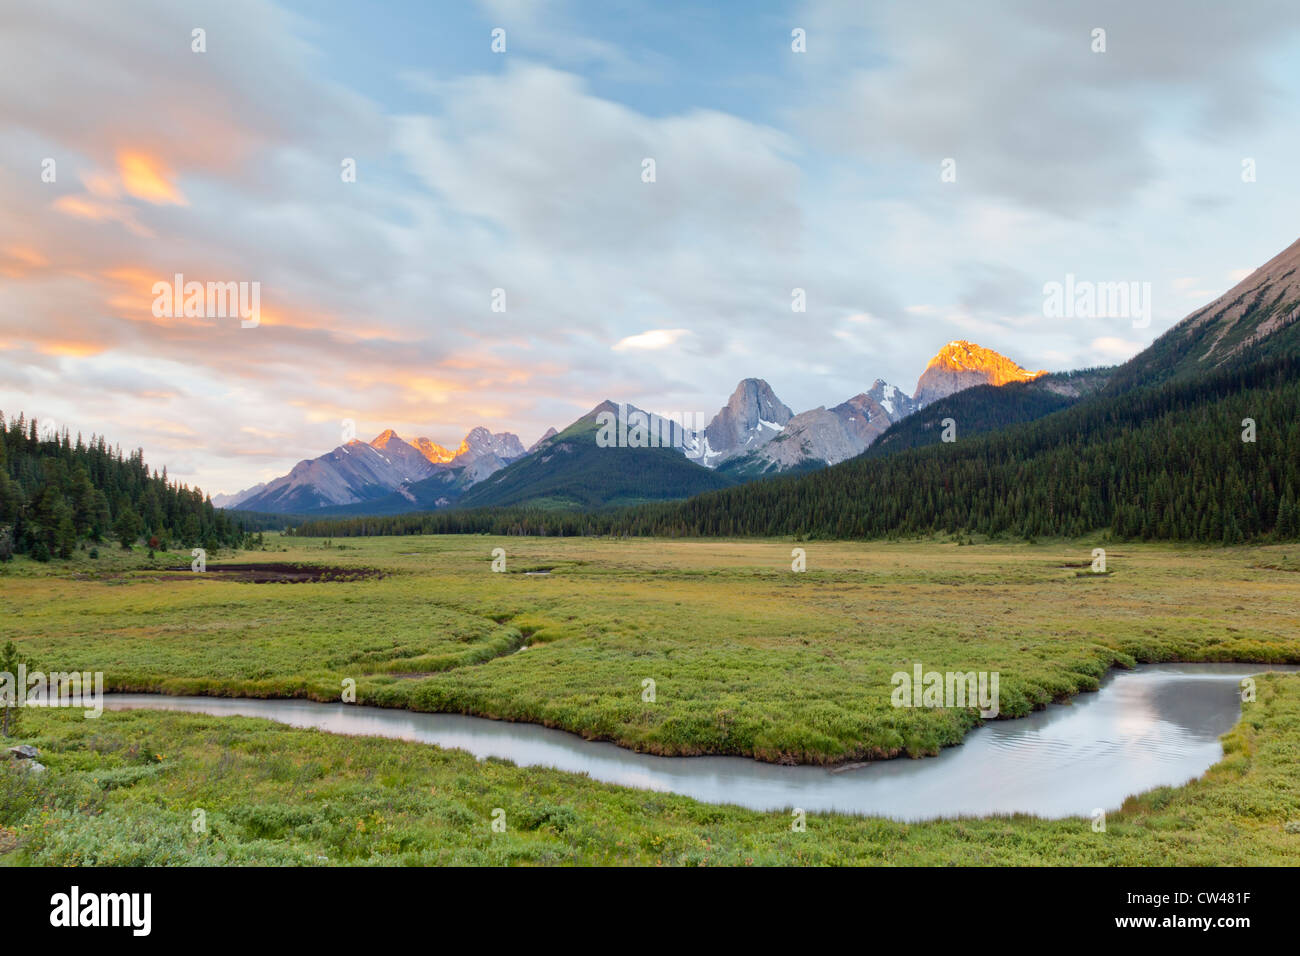 Canada, Spray Valley Provincial Park, Mount. Engadine Meadows at sunrise Stock Photo